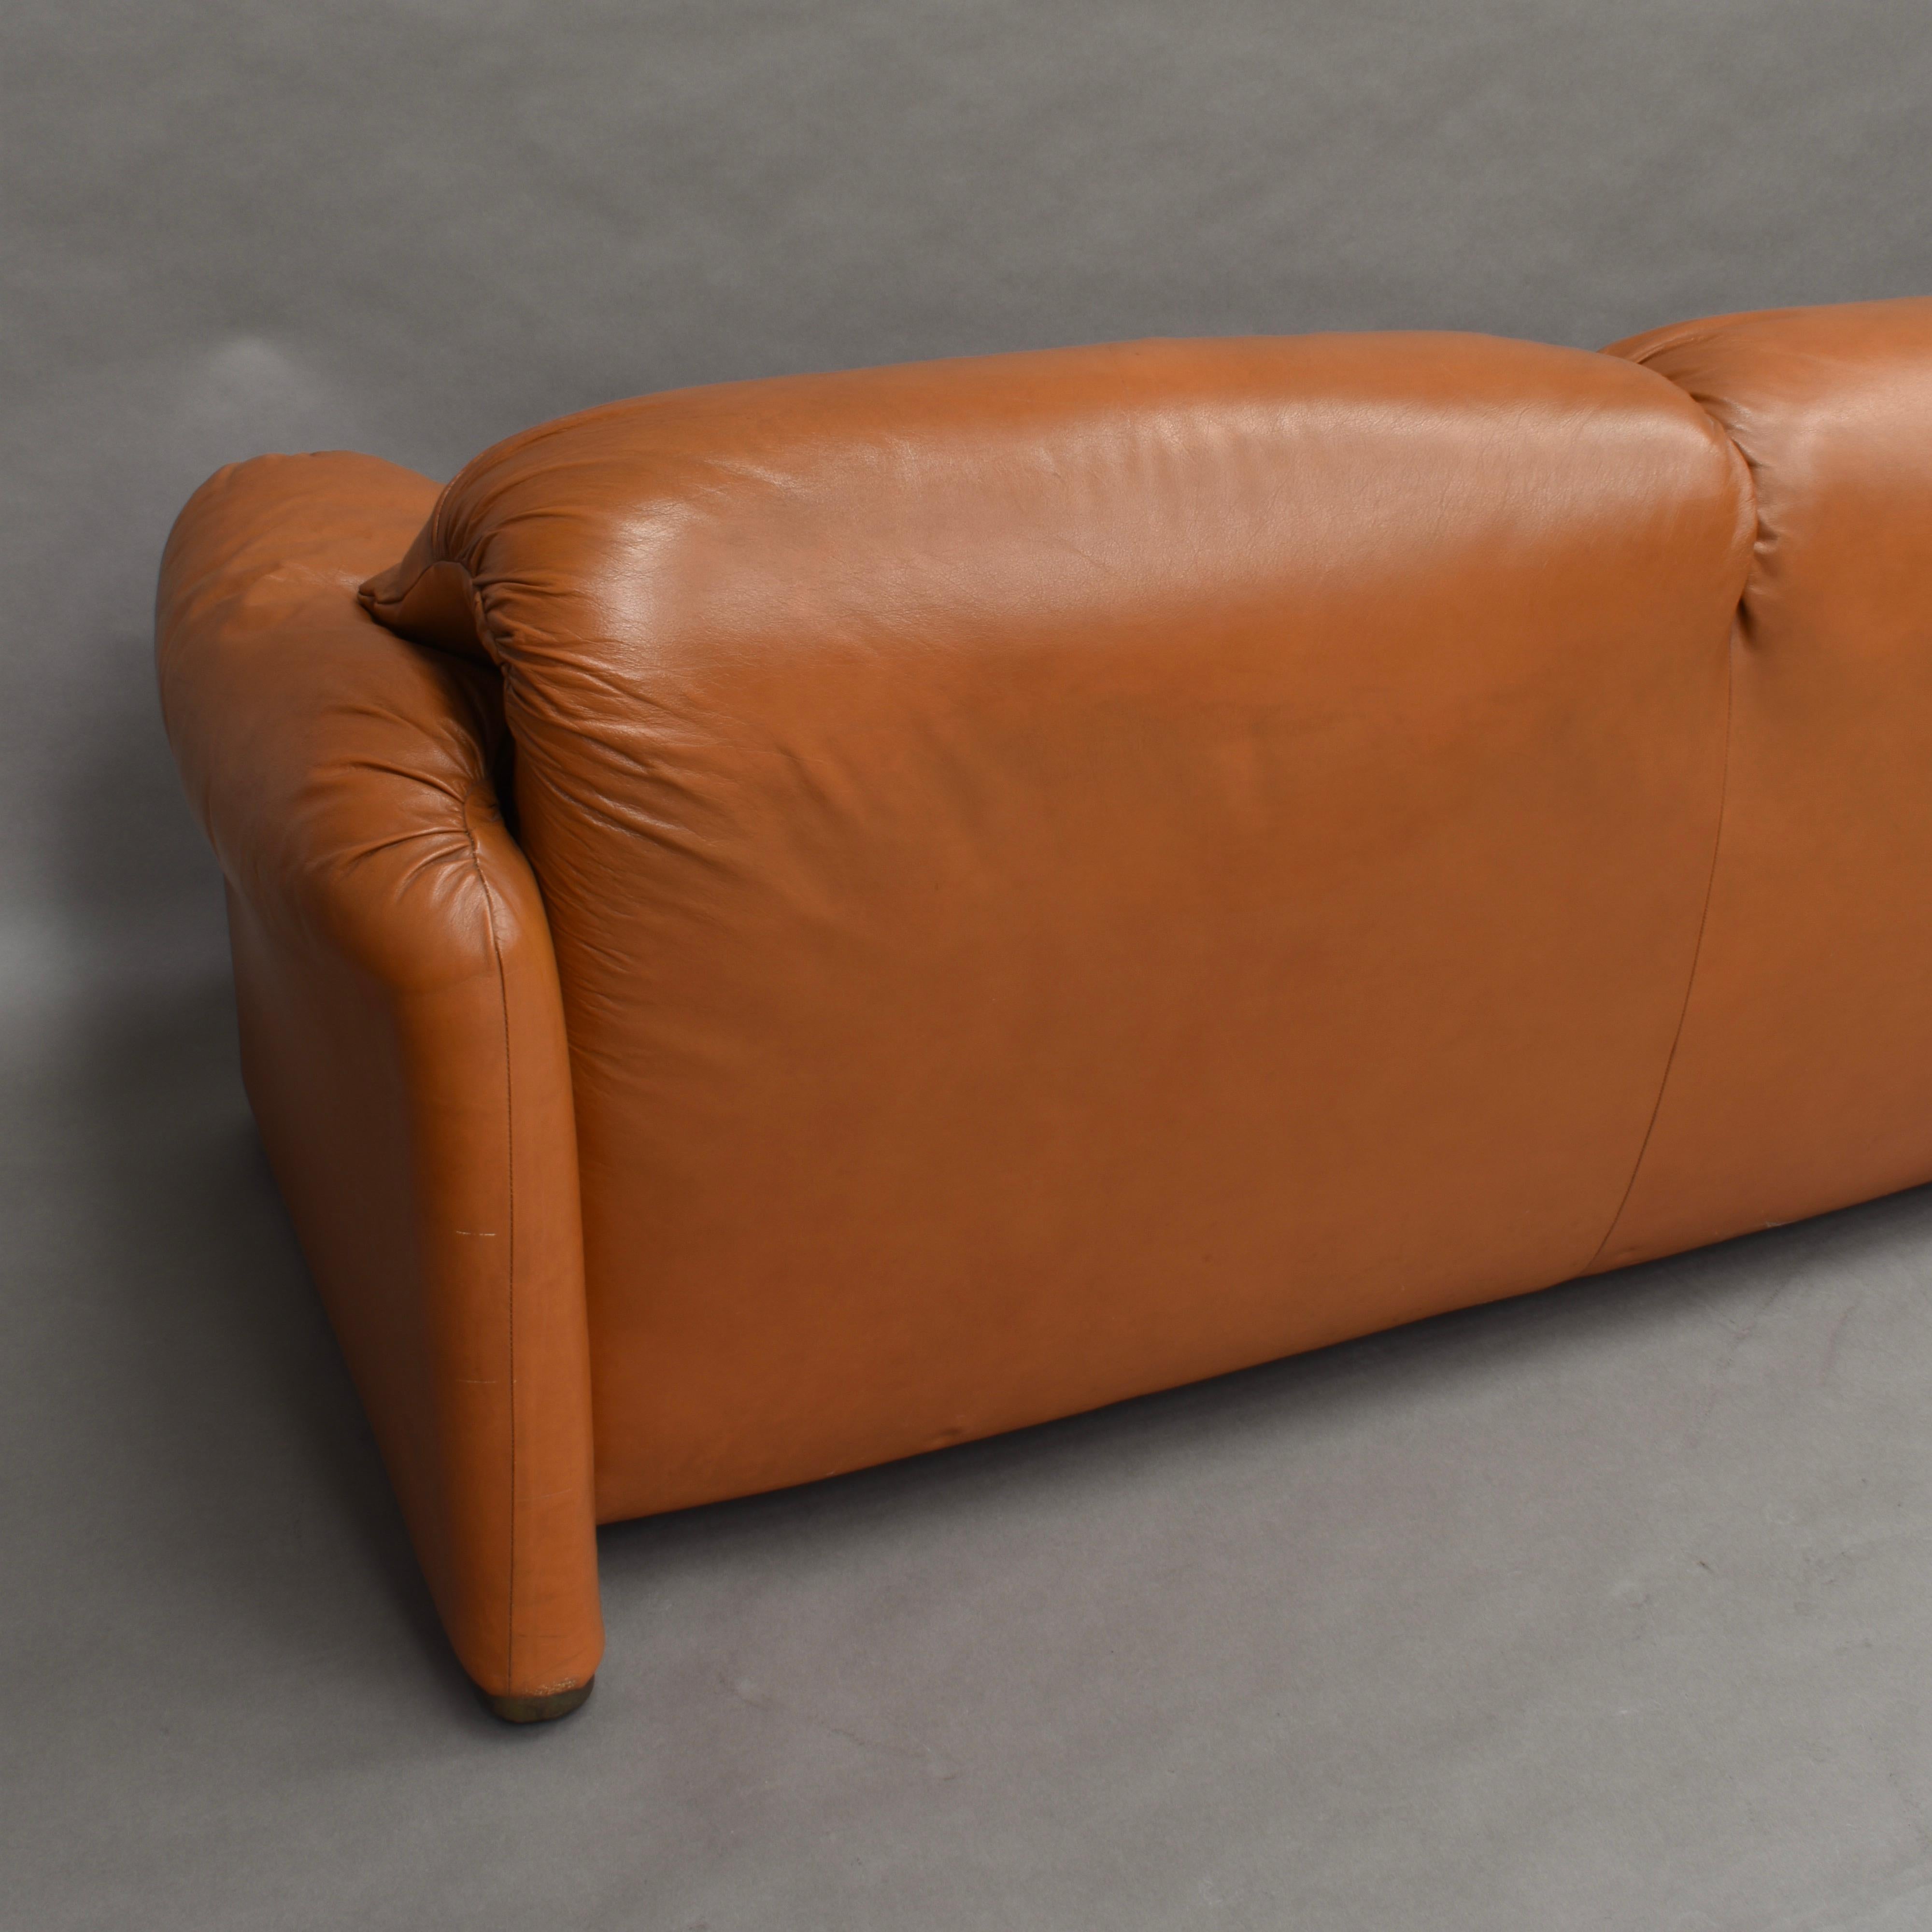 Early Maralunga Sofa in Tan Leather by Vico Magistretti for Cassina, Italy, 1973 8